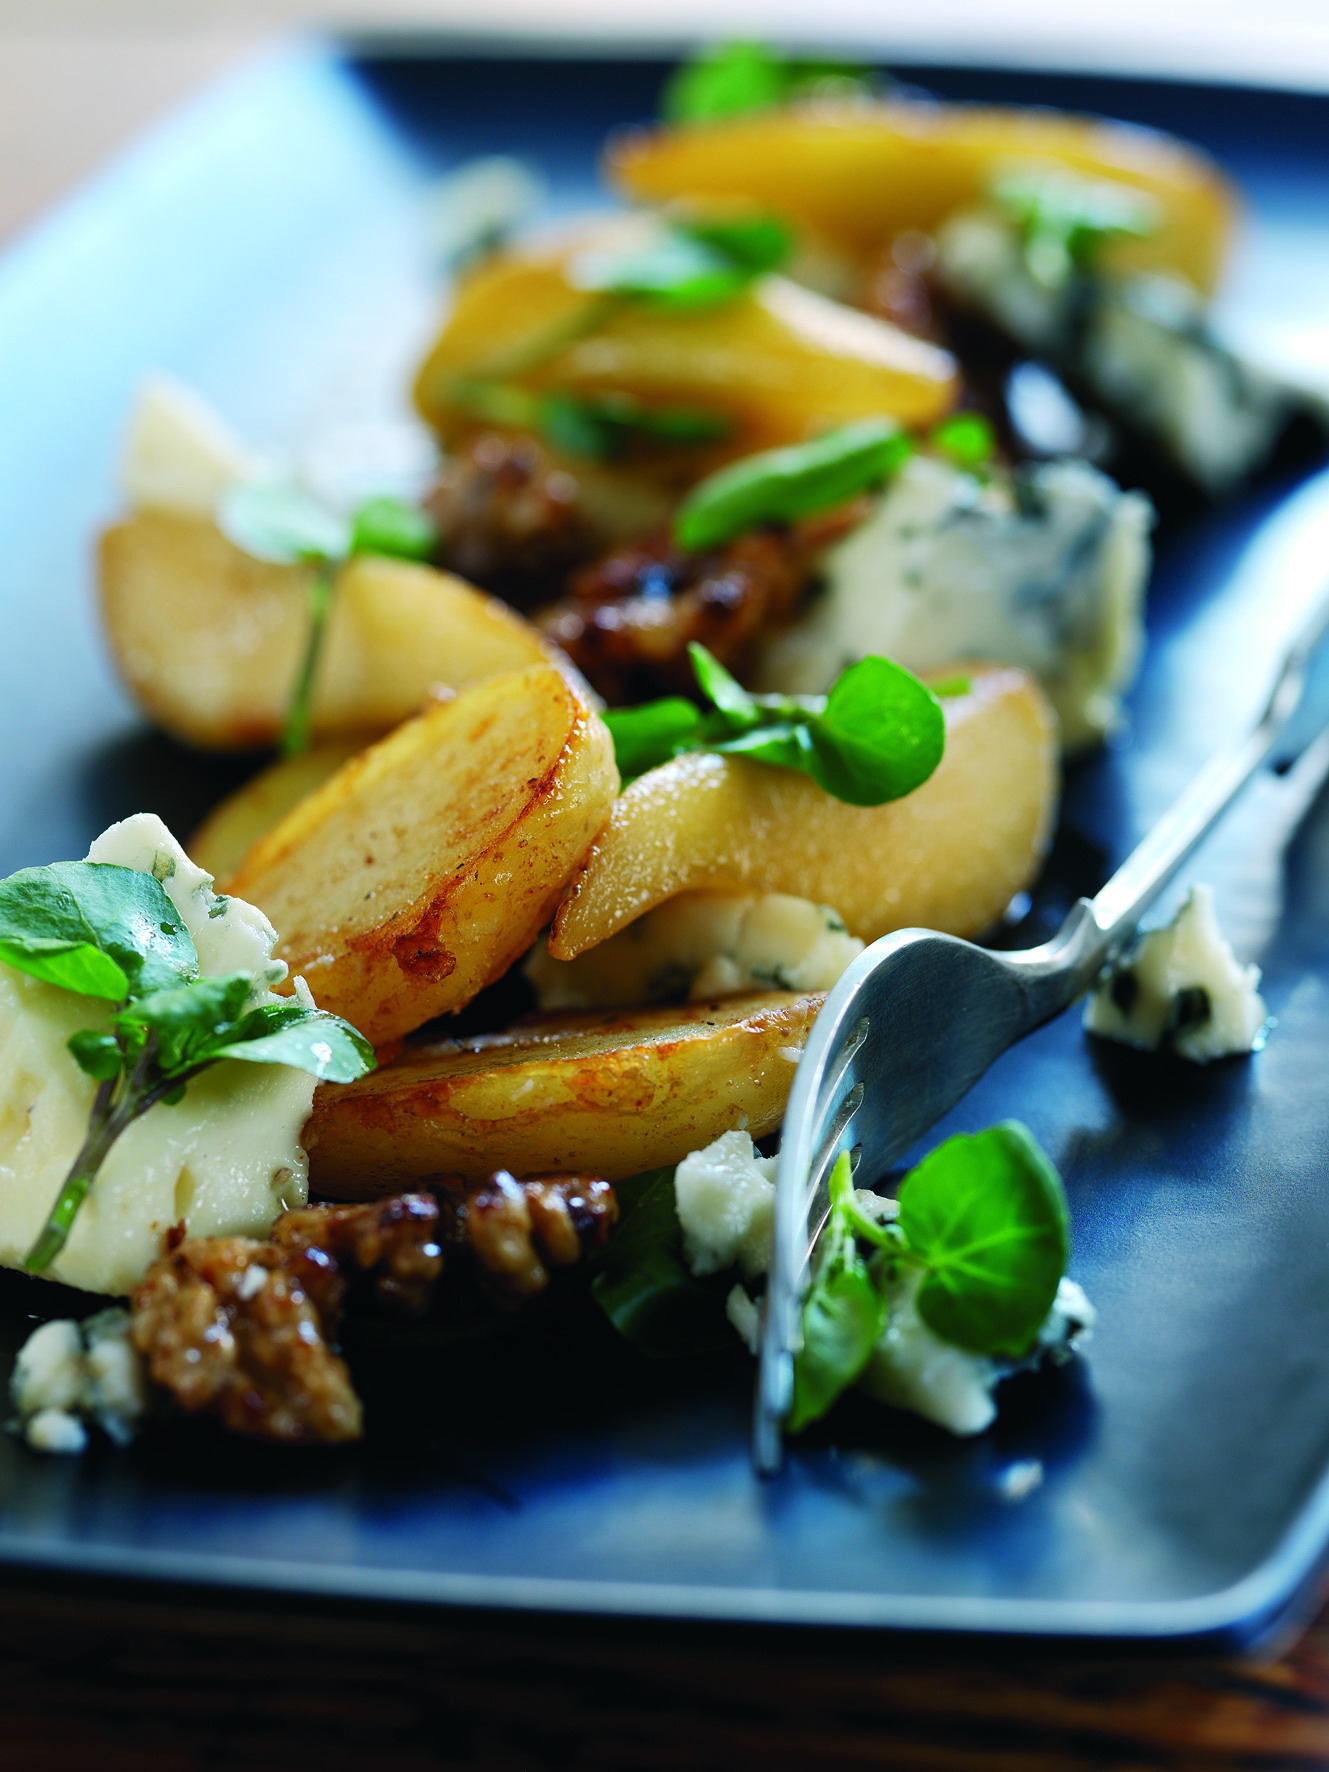 Roast jersey royals with butter dressing recipe